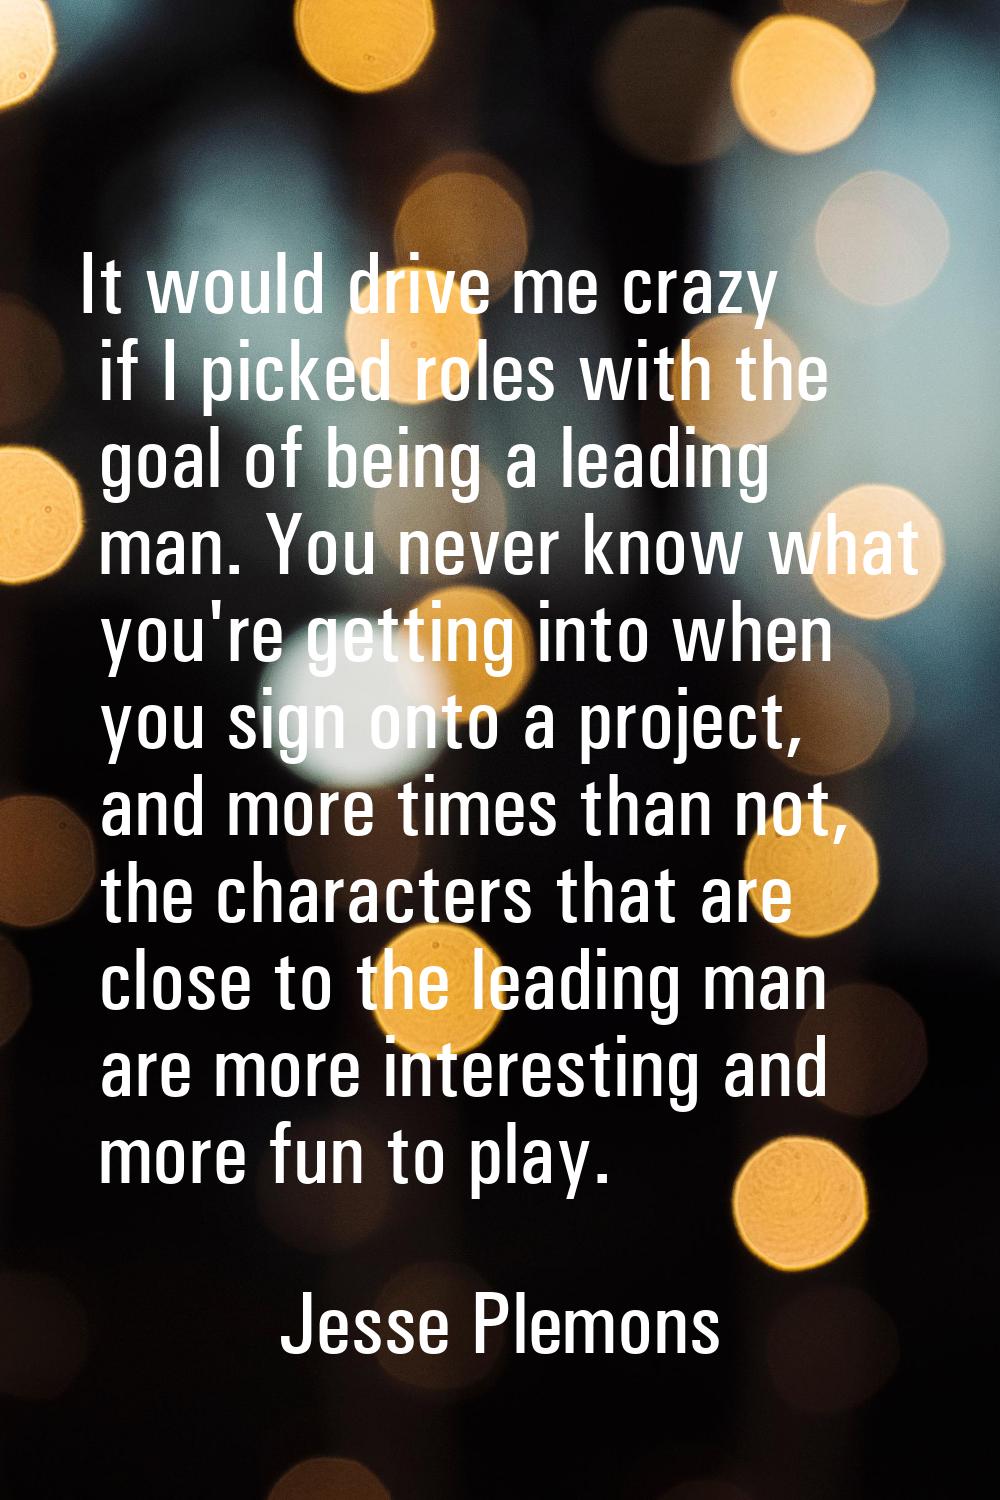 It would drive me crazy if I picked roles with the goal of being a leading man. You never know what